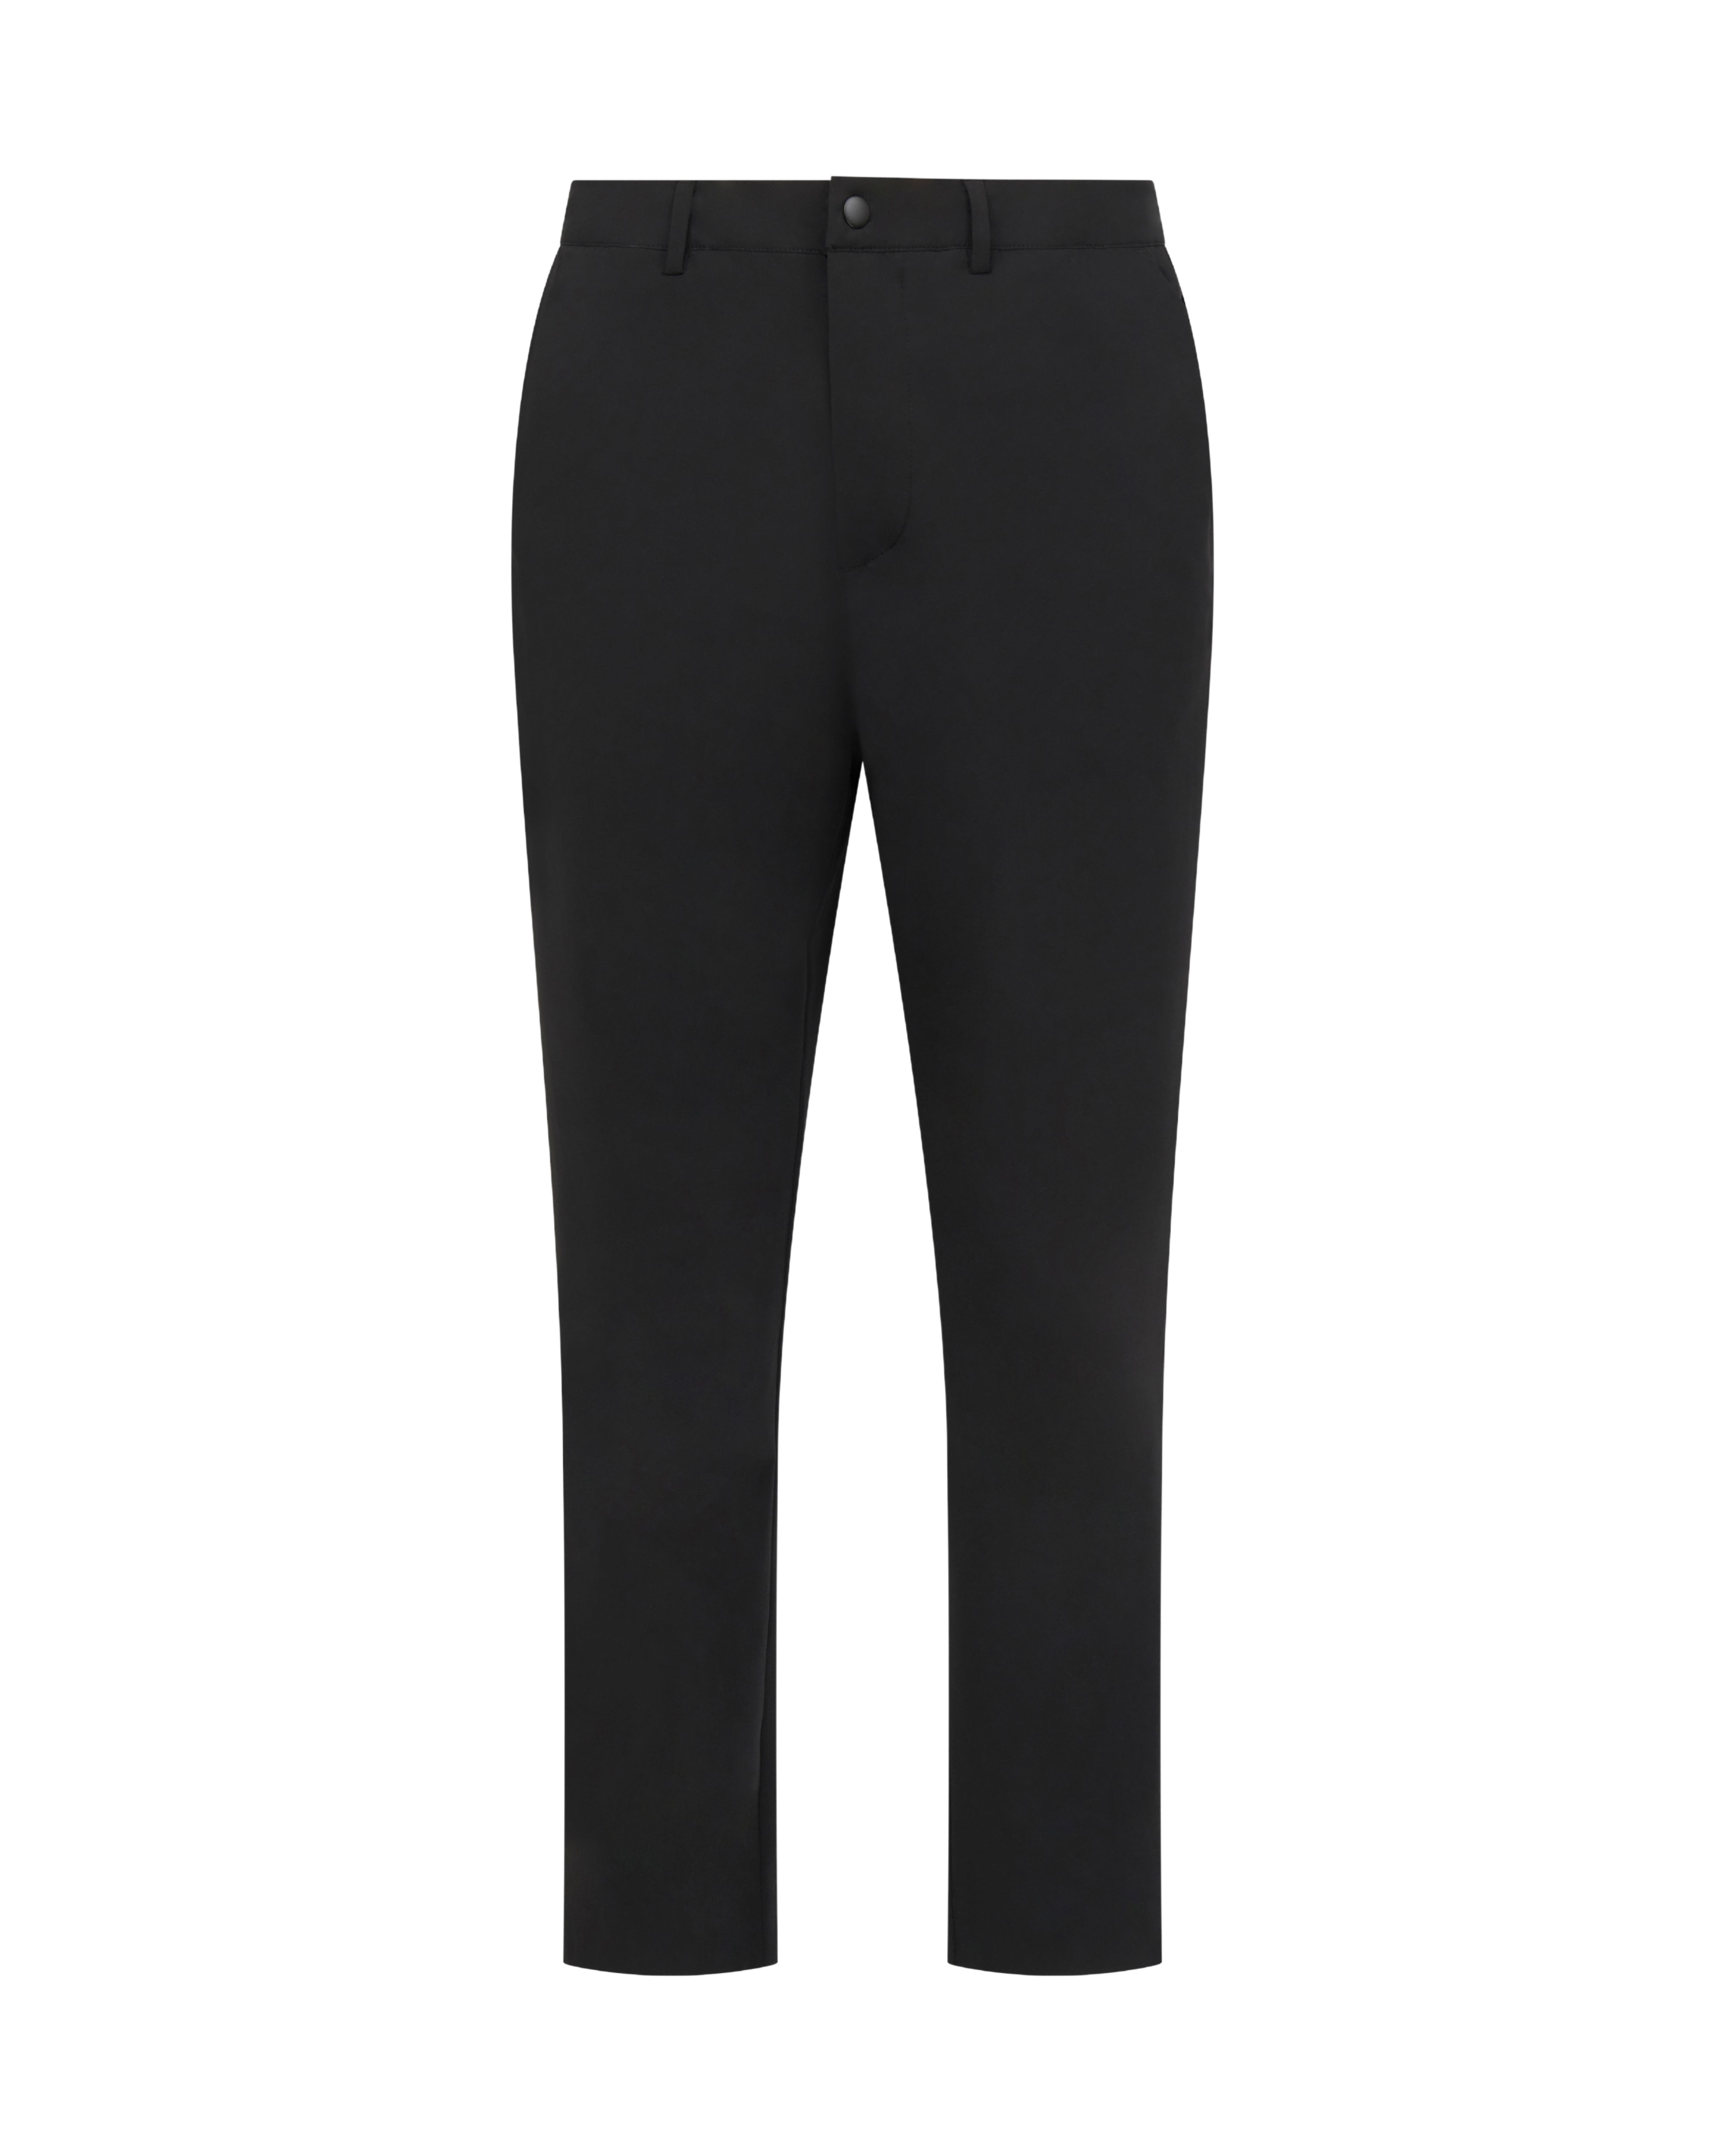 MANORS Men's The Lightweight Course Trouser | golf and sports fashion brands at agorabkk 